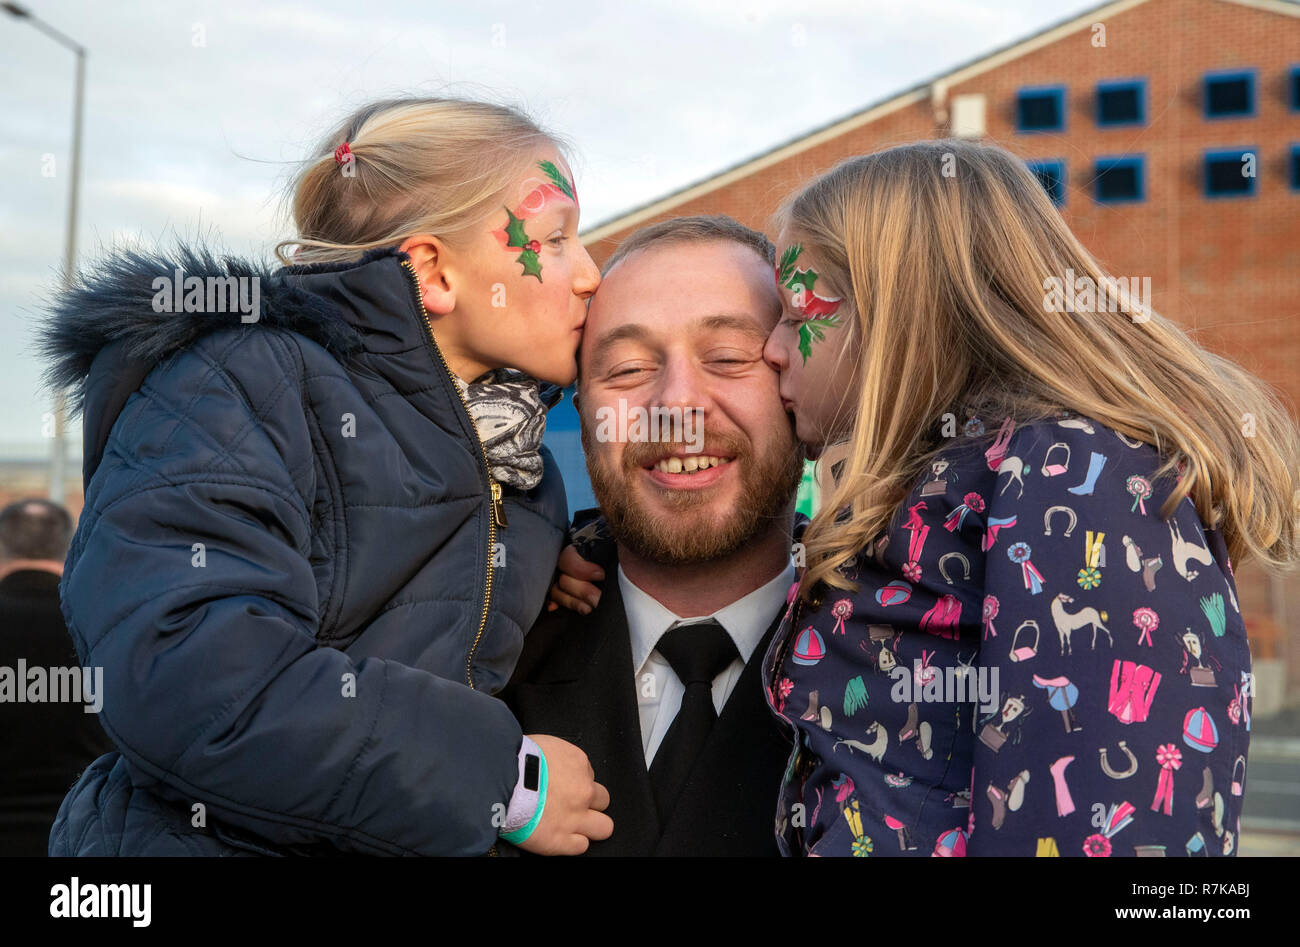 Petty Officer Michael Abley, 36, from Bordon, Hampshire, was met by his daughters Grace, (left) nine, and Evie, six after the Royal Navy aircraft carrier HMS Queen Elizabeth arrived in Portsmouth, returning home from her four-month Westlant deployment after successfully conducting flight trials of the F-35B fighter jets. Stock Photo